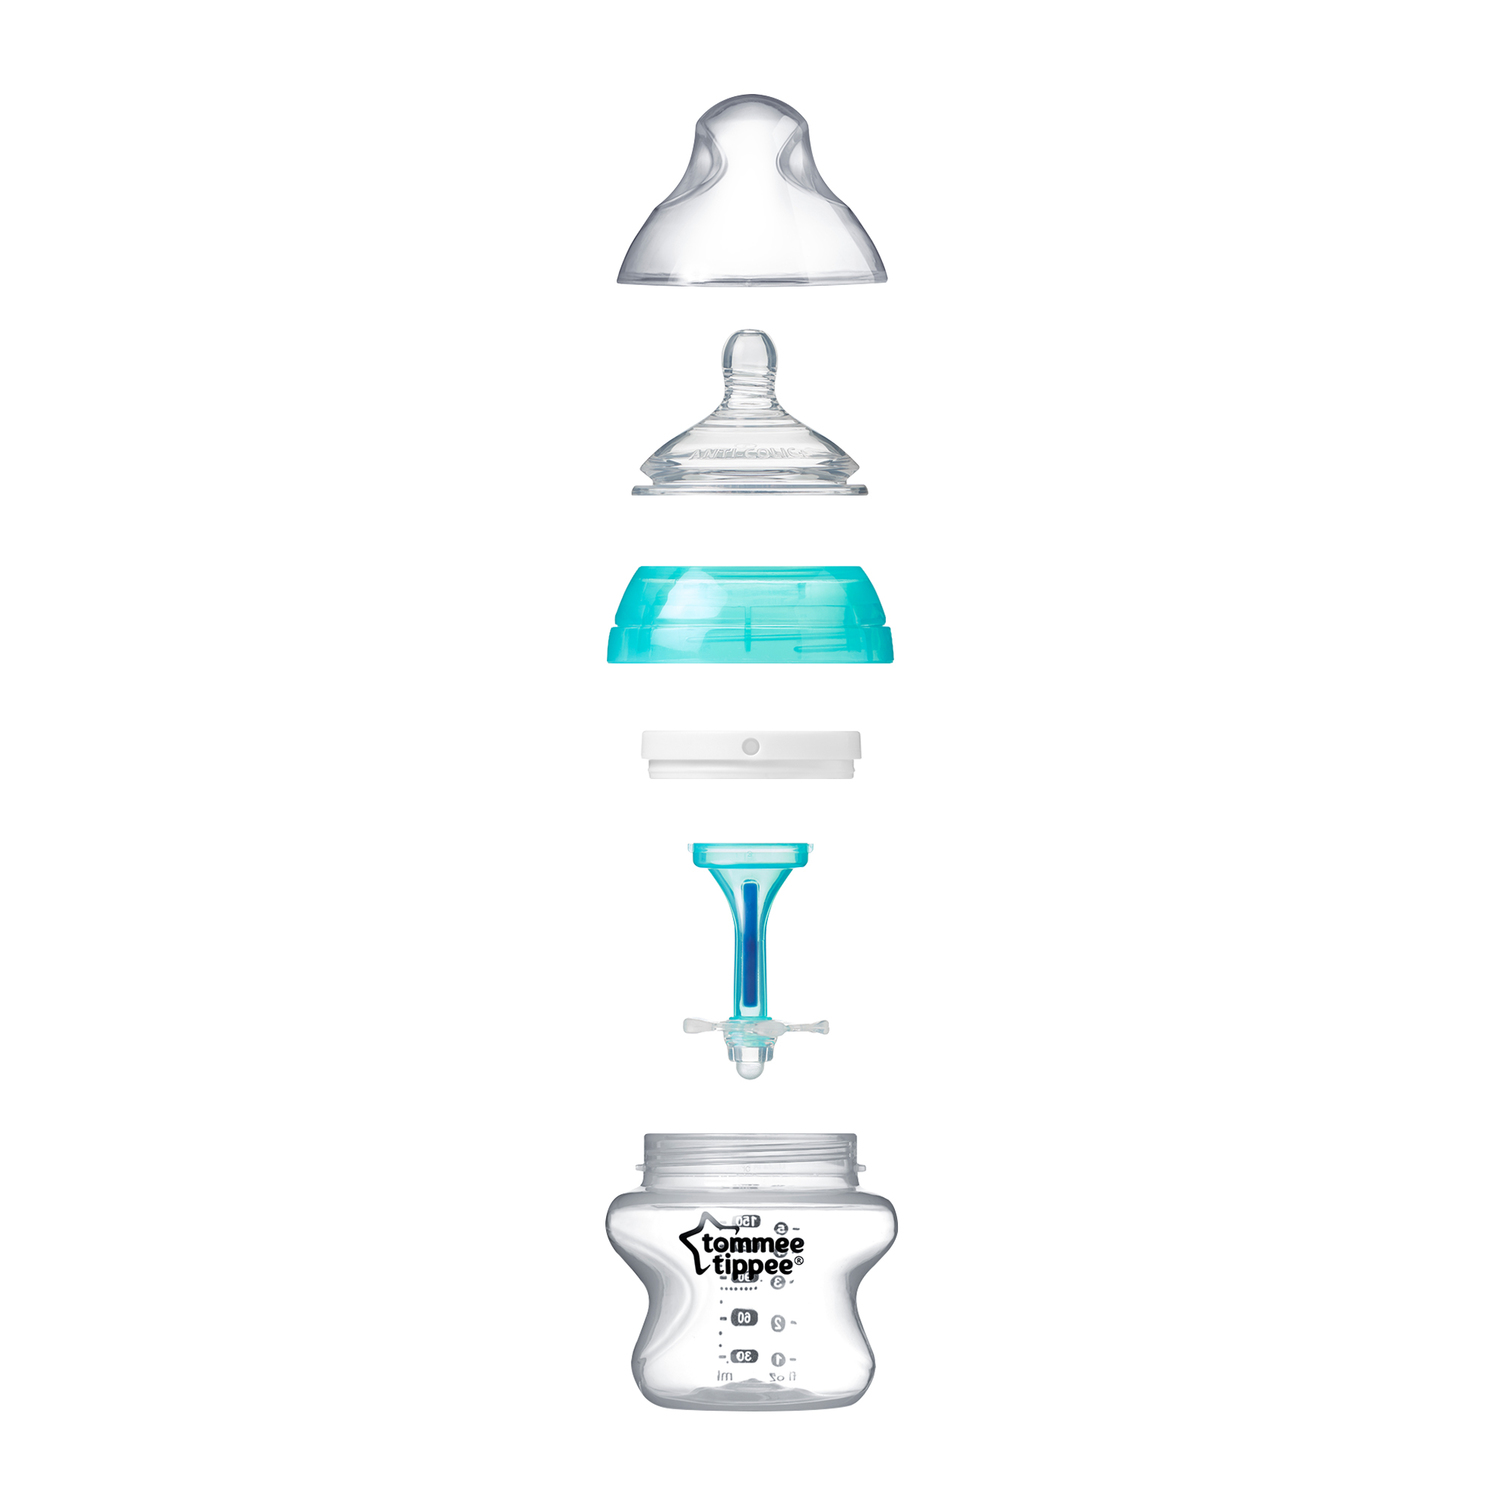 Tommee Tippee Advanced Anti-Colic Baby Bottles – 5oz, Clear, 2pk - image 4 of 10